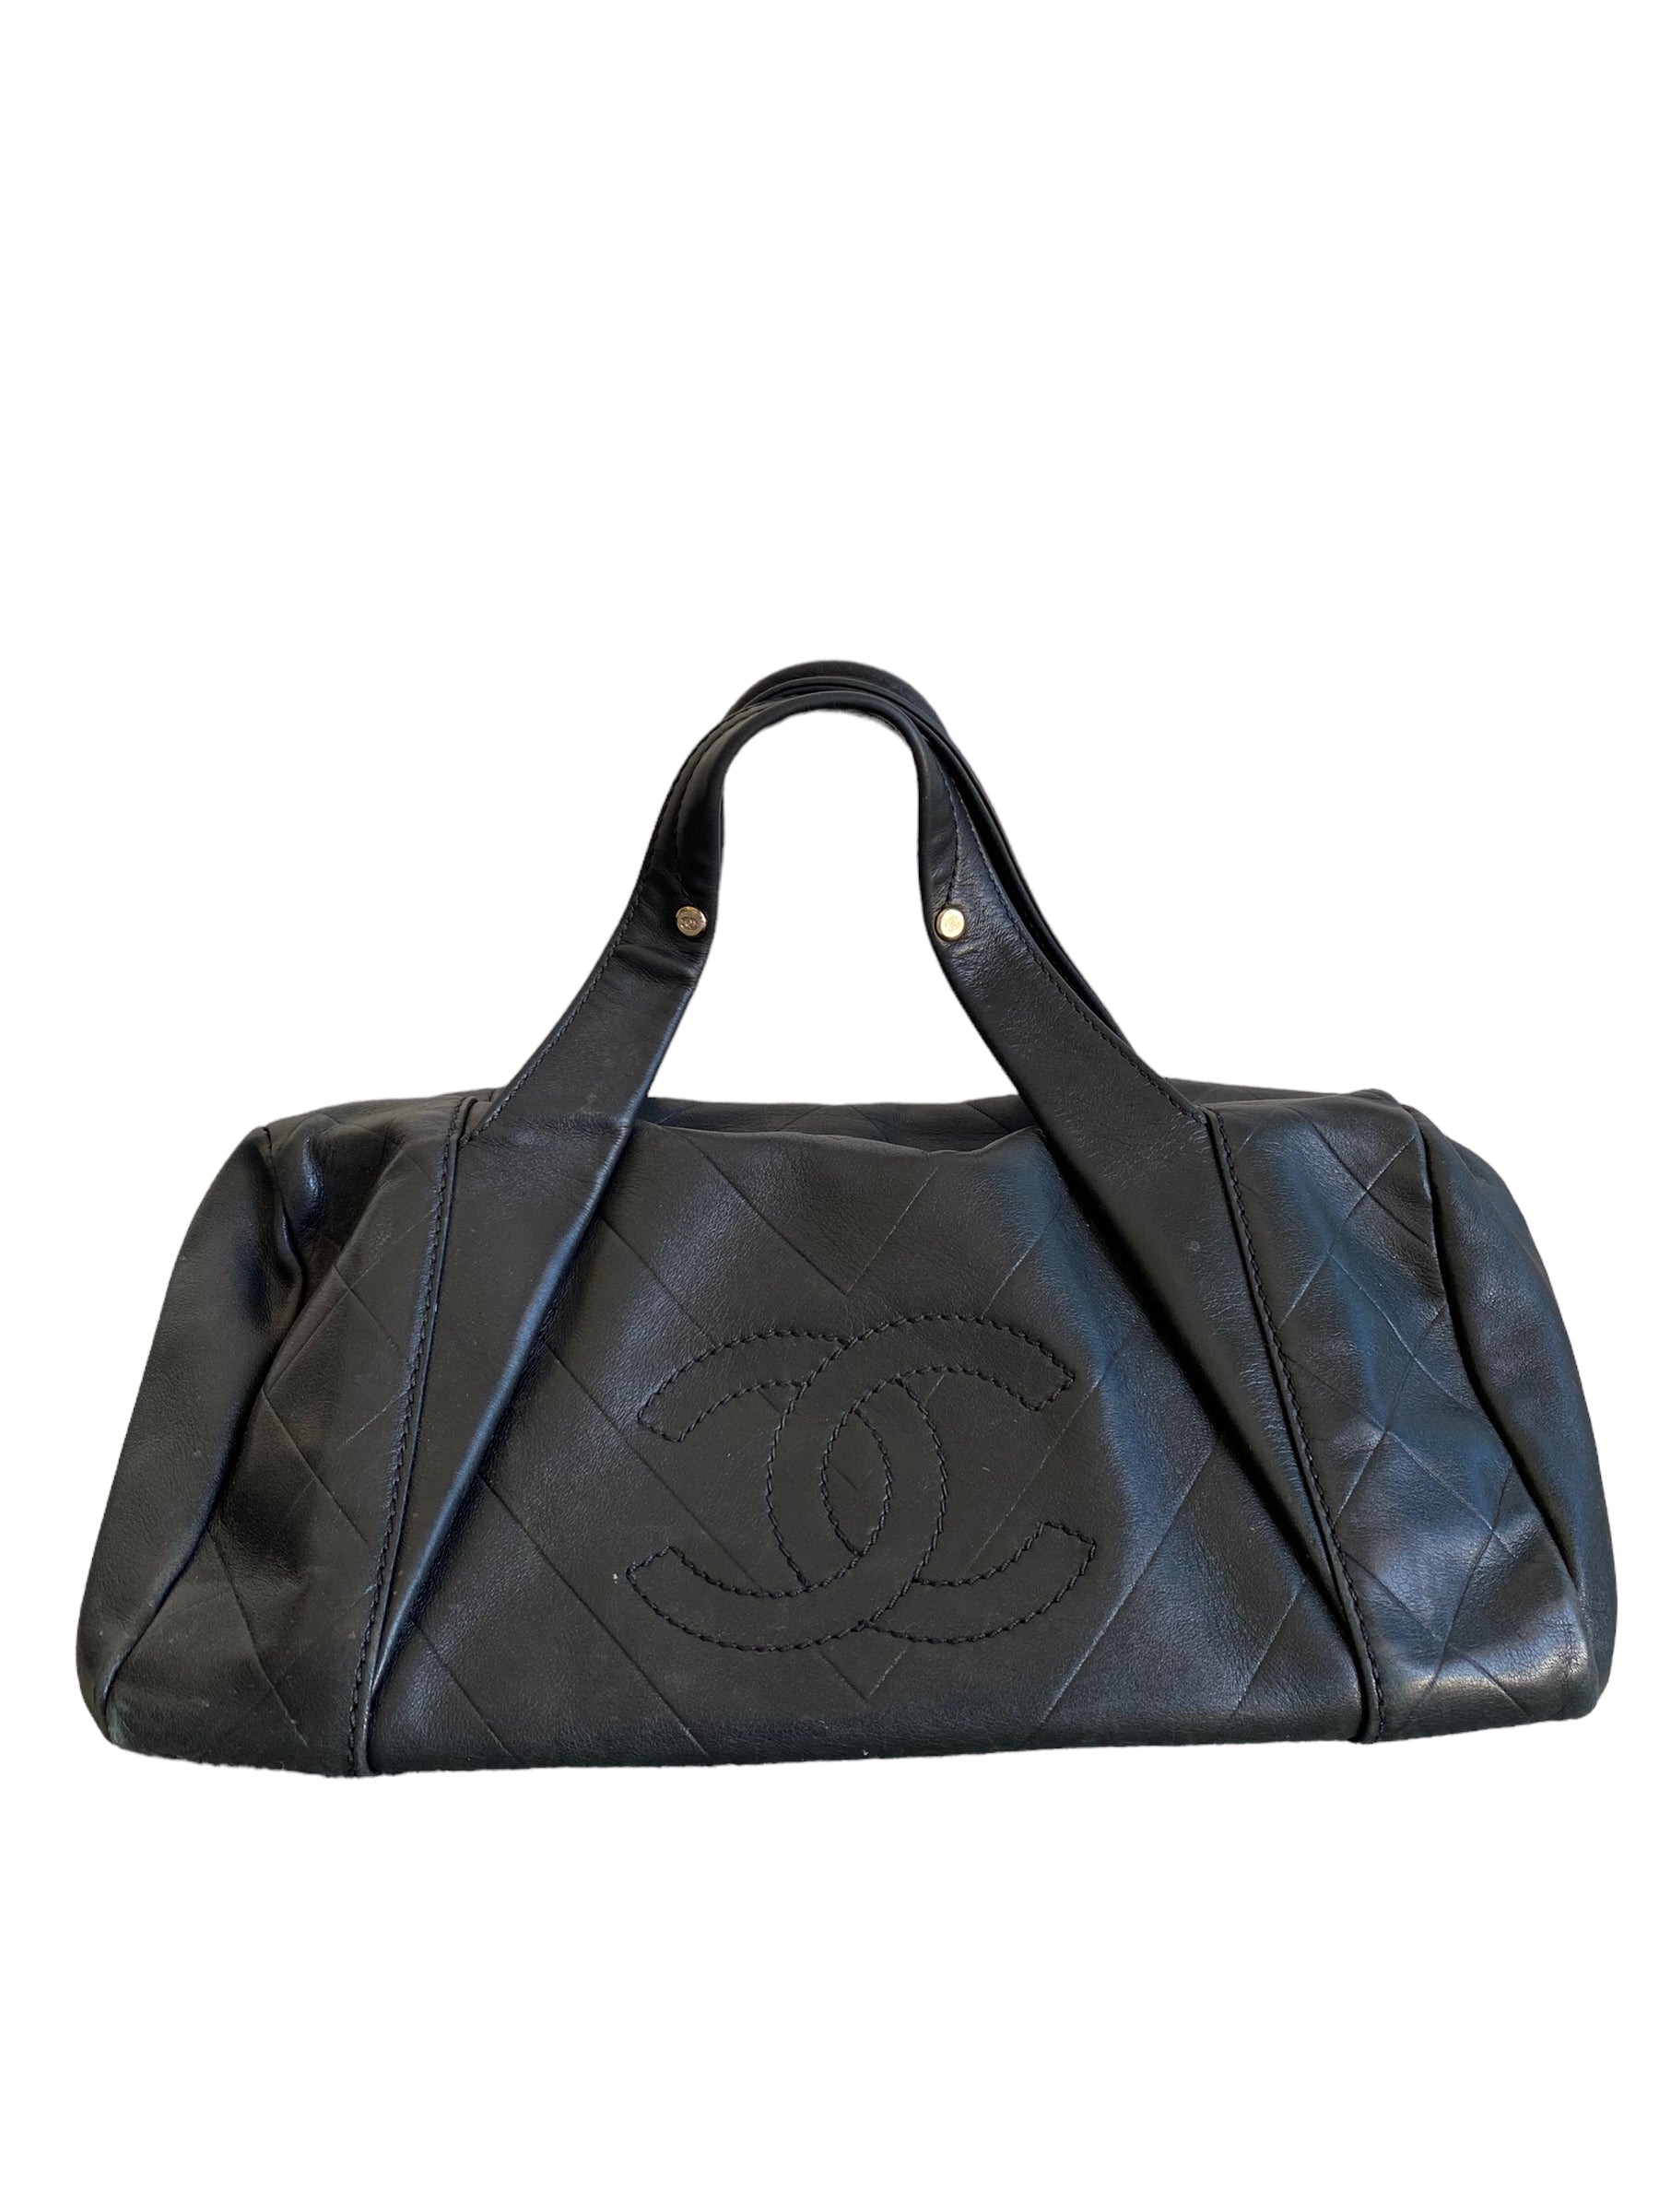 chanel duffle products for sale